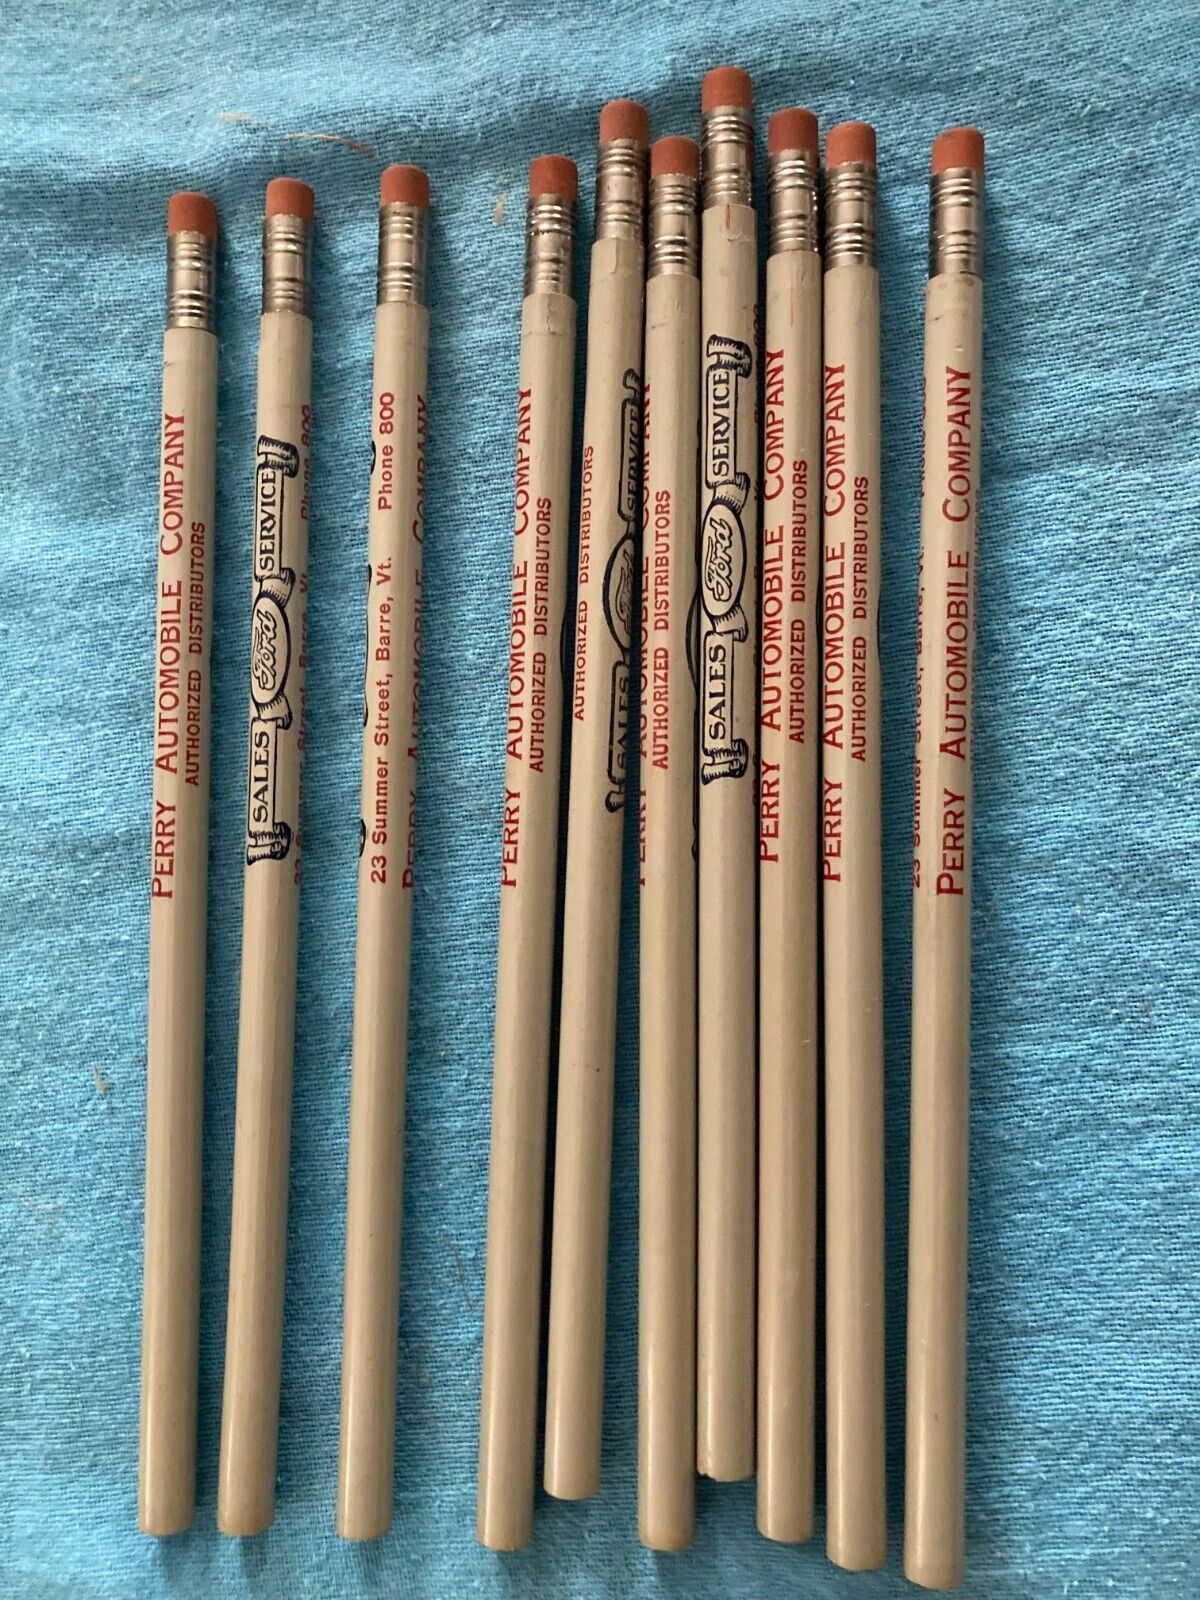 14 Vintage Advertising Pencils Lot. New Old Stock 1940-50s Barre VT and Dover NH Без бренда